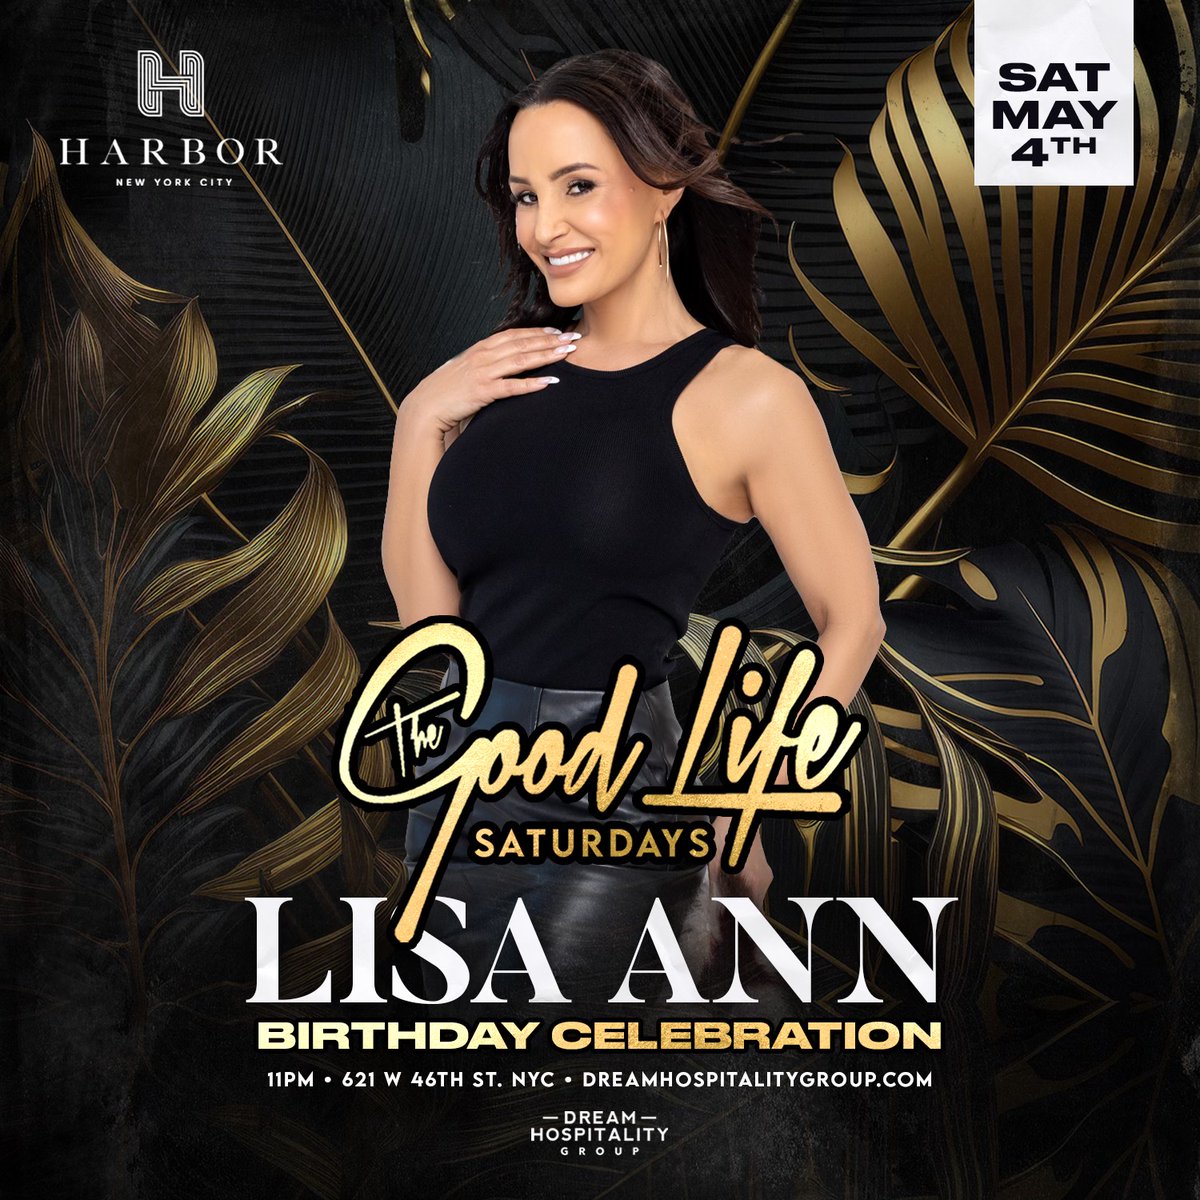 Only 2 more days until the festivities begin! ✨ Get ready to light up the night on May 4th at @Harbornightclub! It's MY #birthday & we're uncorking the fun in style! 🥂 🖤 See you there.. #thereallisaann #birthdaycelebration #harbornyc #nycnightlife #finalcountdown